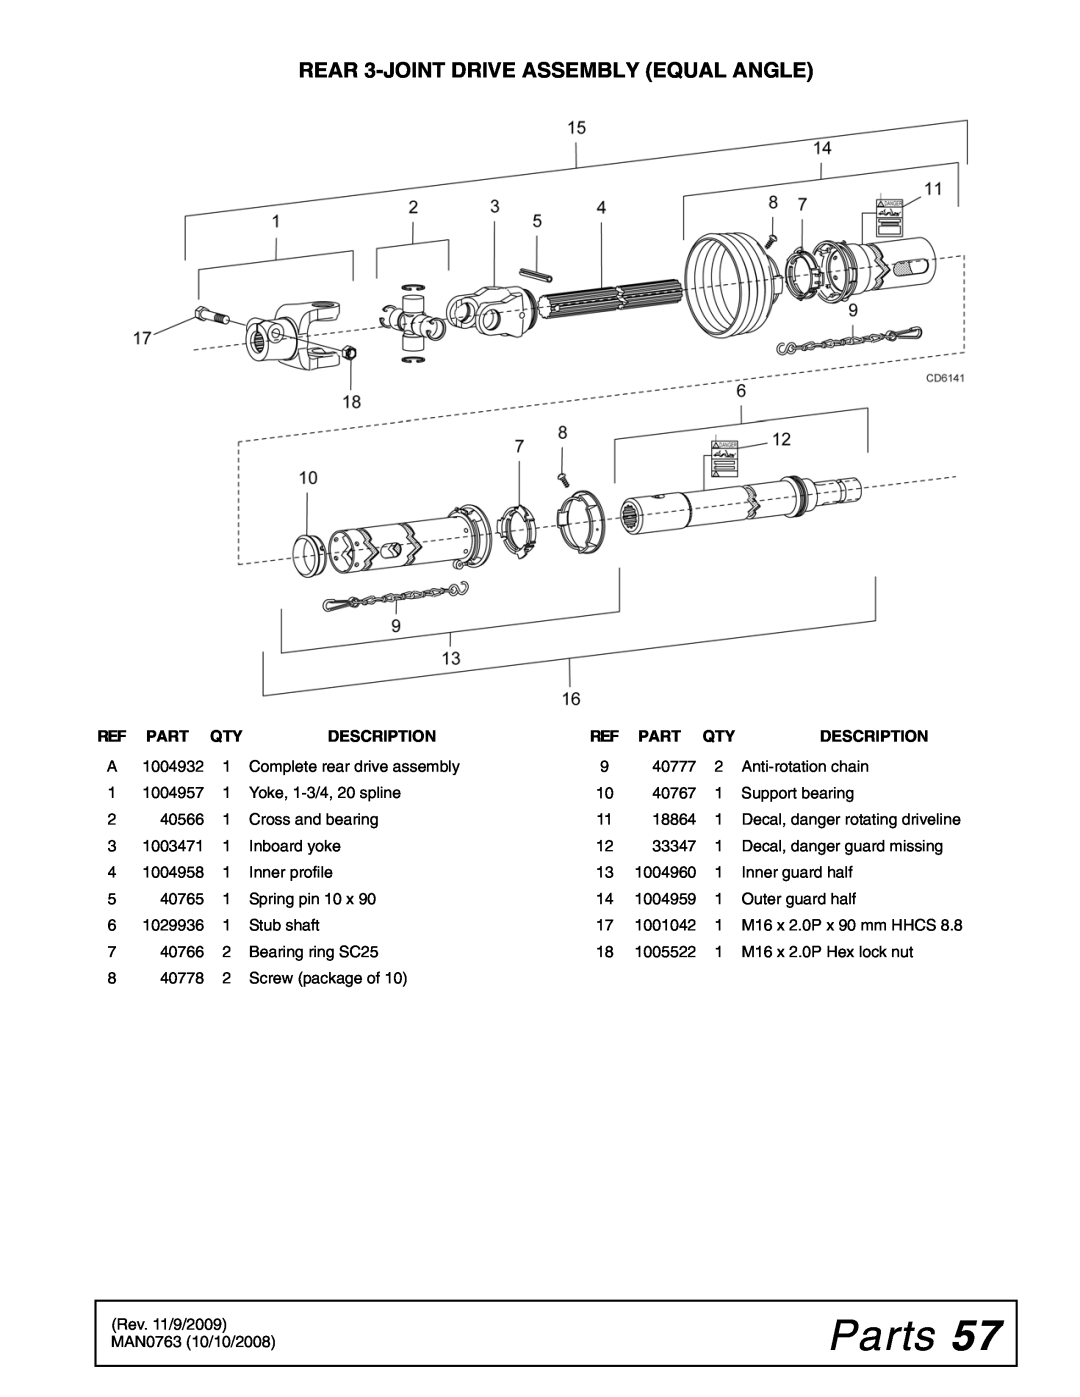 Woods Equipment BW240HDQ manual Parts, REAR 3-JOINT DRIVE ASSEMBLY EQUAL ANGLE, Description 